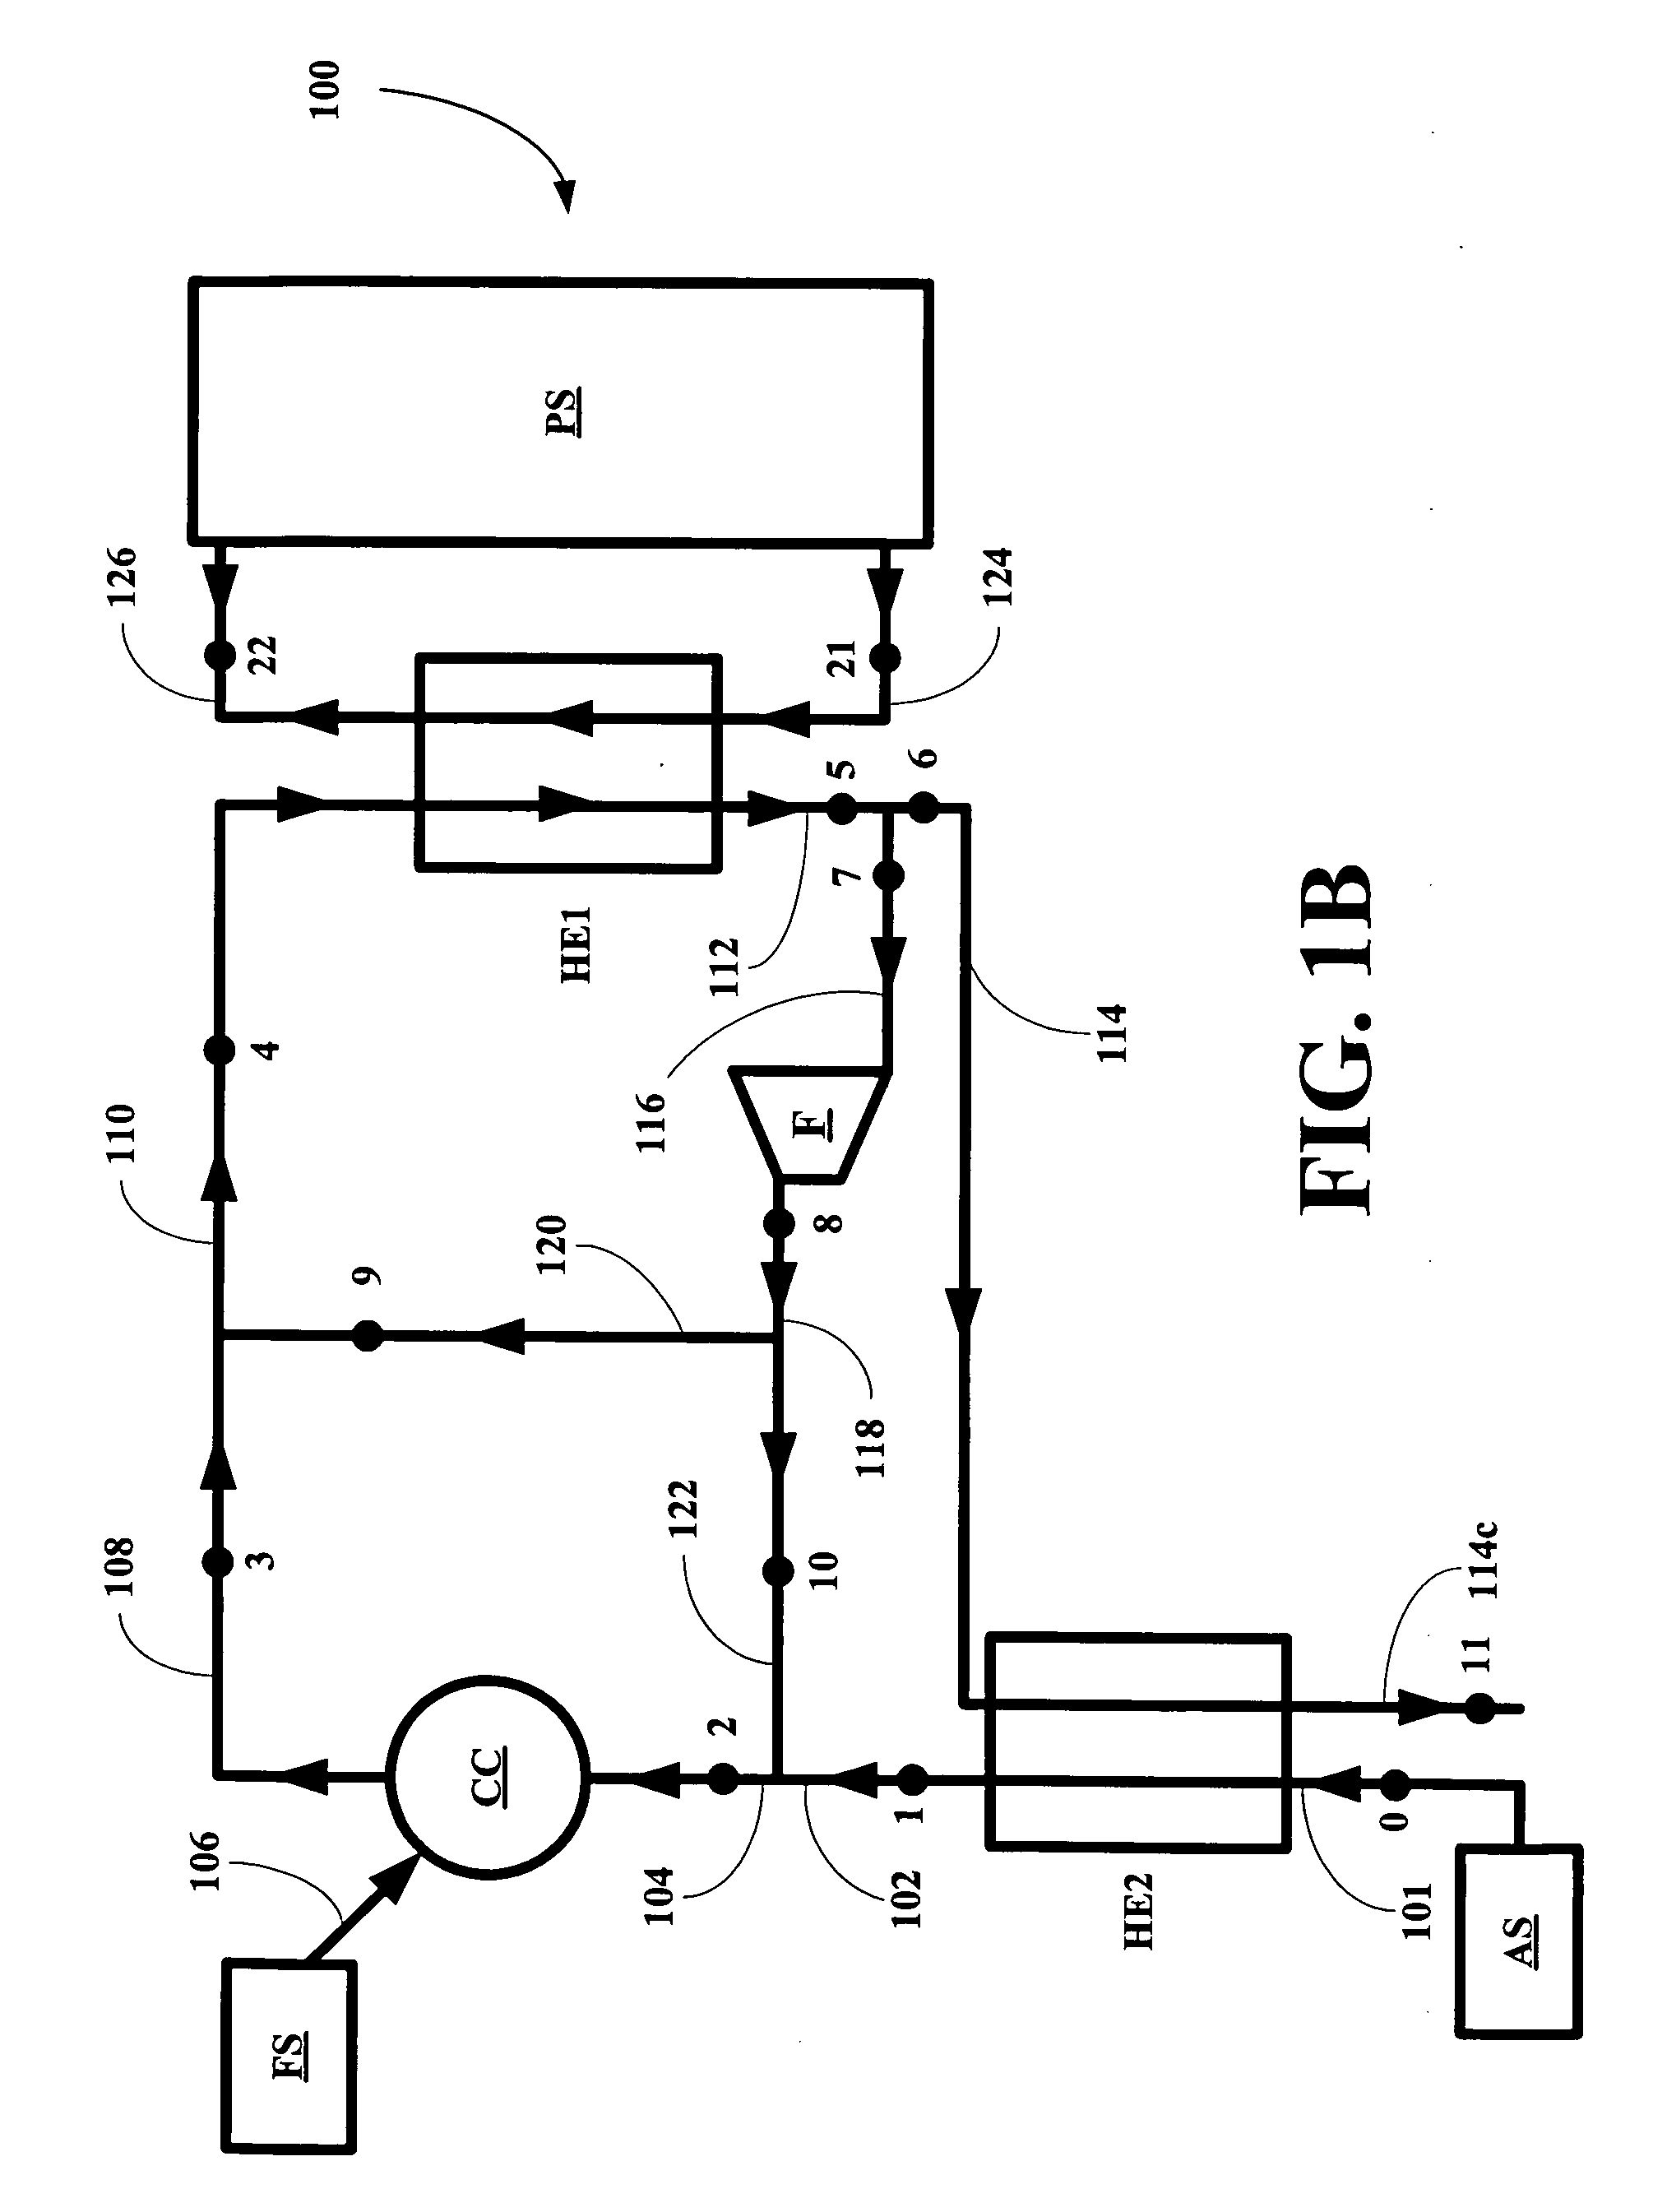 Combustion system with recirculation of flue gas